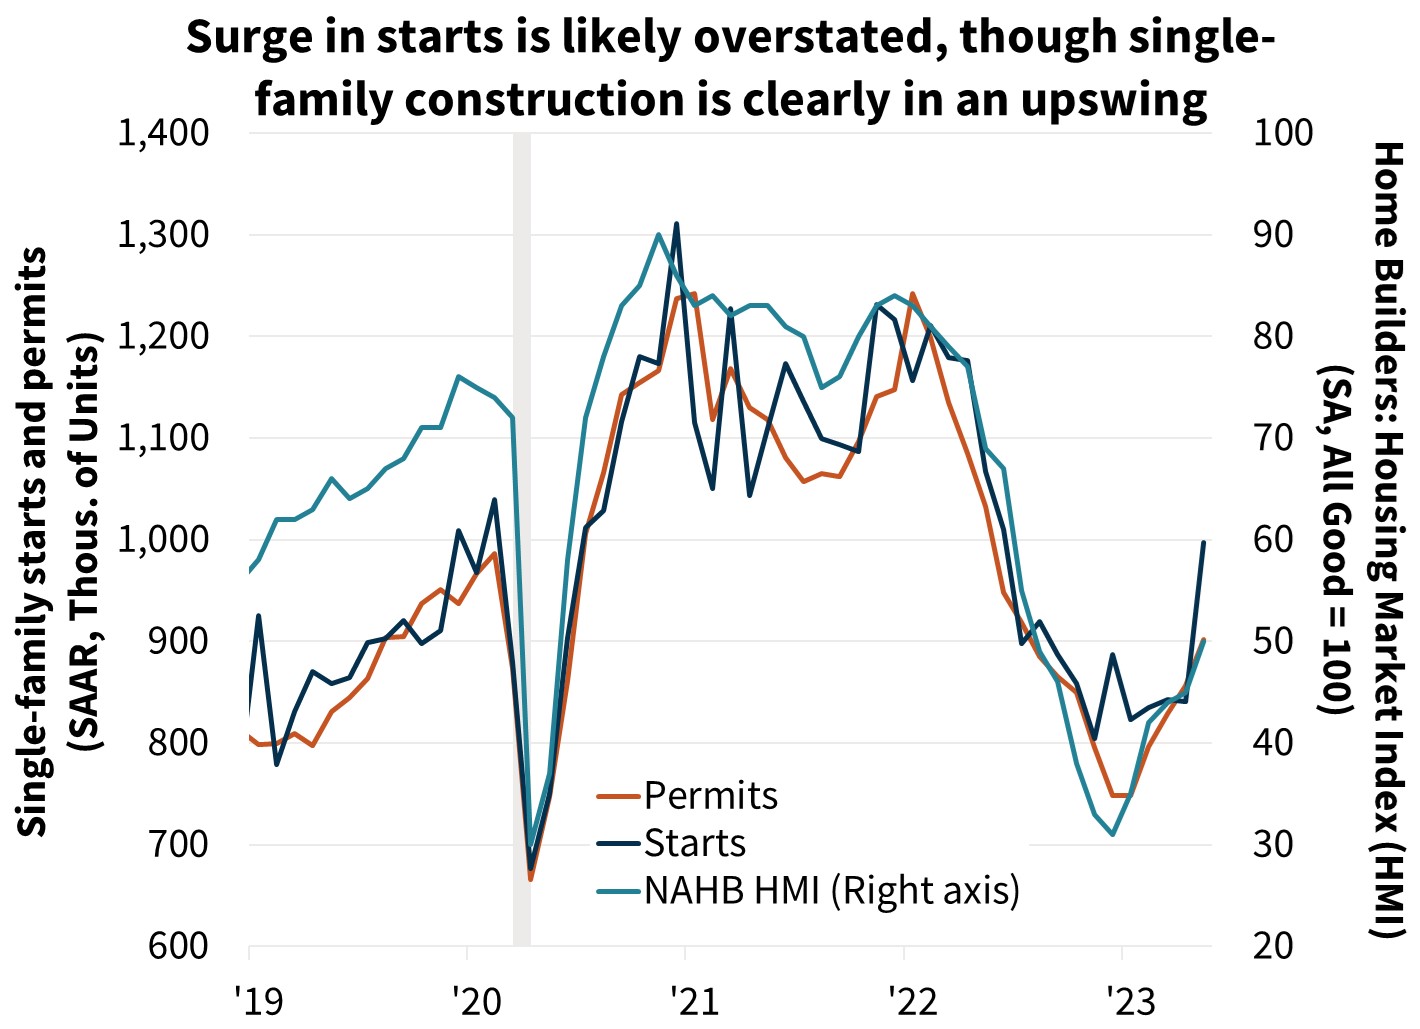 Surge in starts is likely overstated, though single-family construction is clearly in an upswing